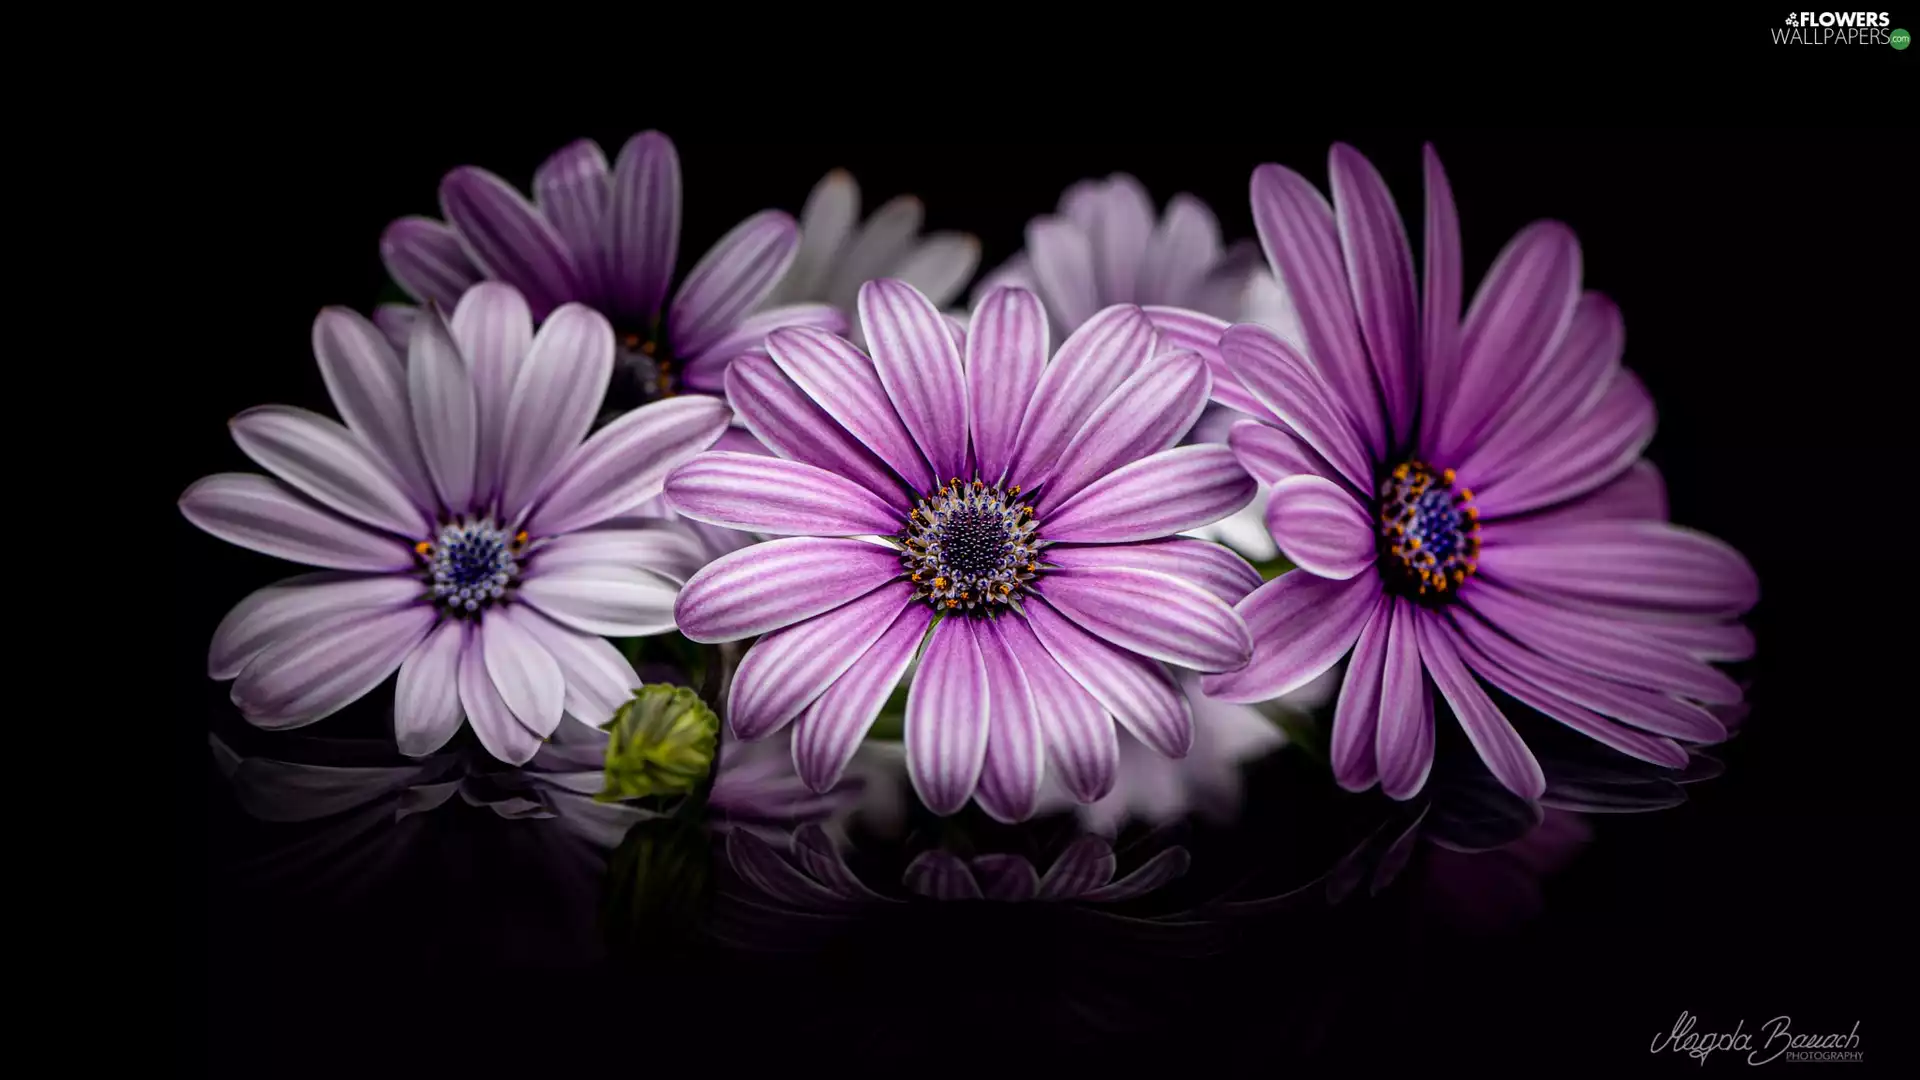 Black, background, African Daisies, White-Purple, Flowers